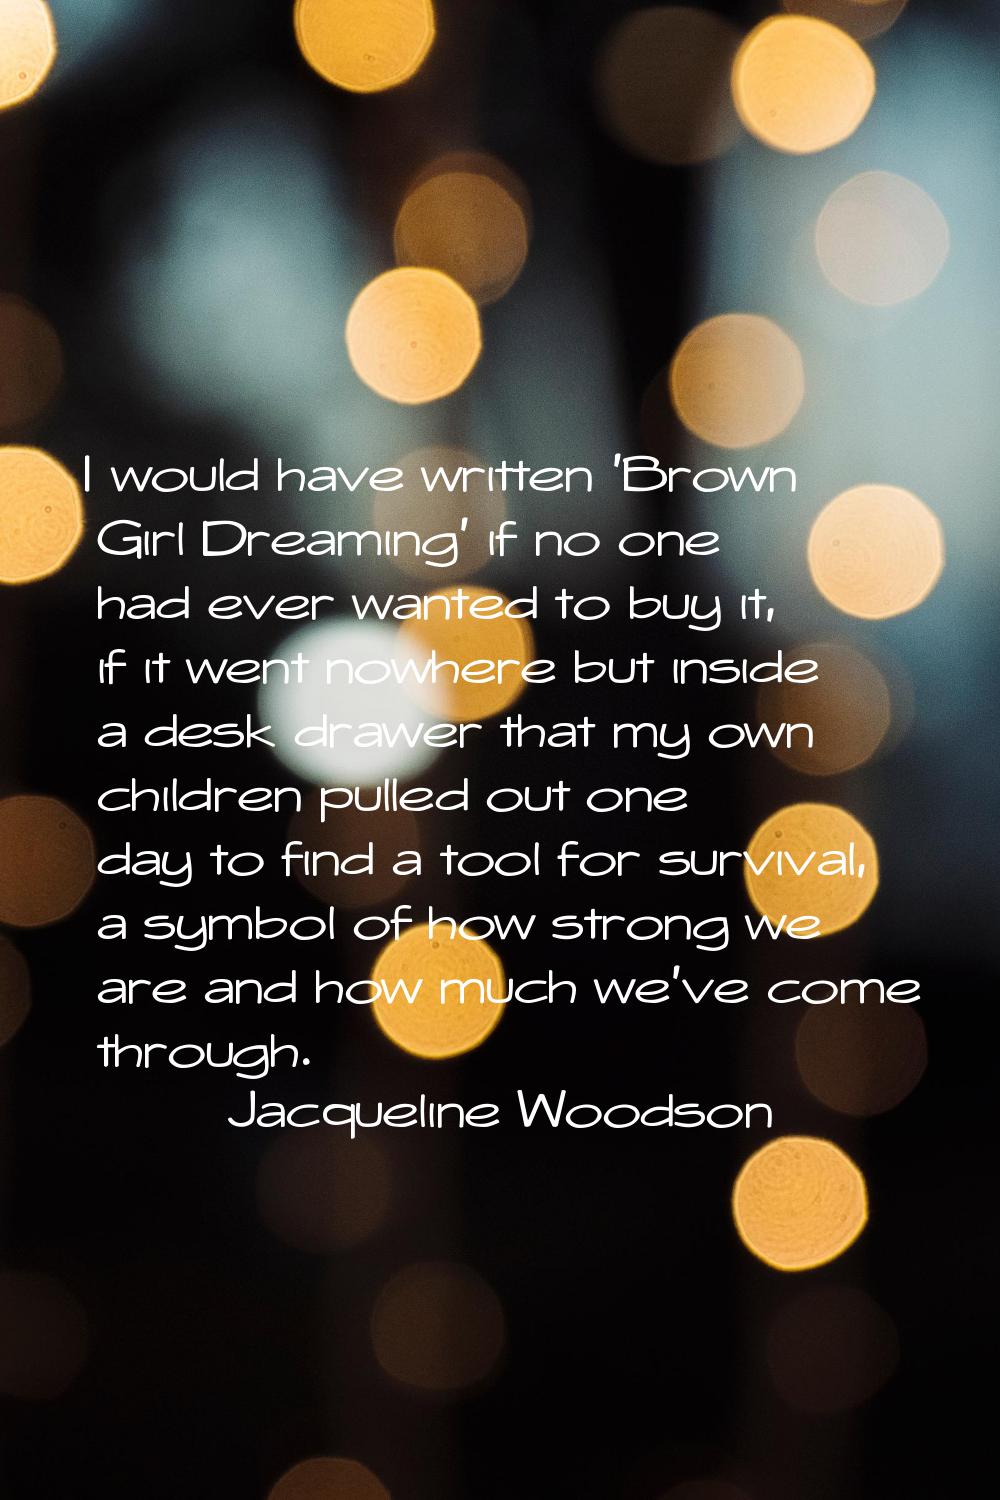 I would have written 'Brown Girl Dreaming' if no one had ever wanted to buy it, if it went nowhere 